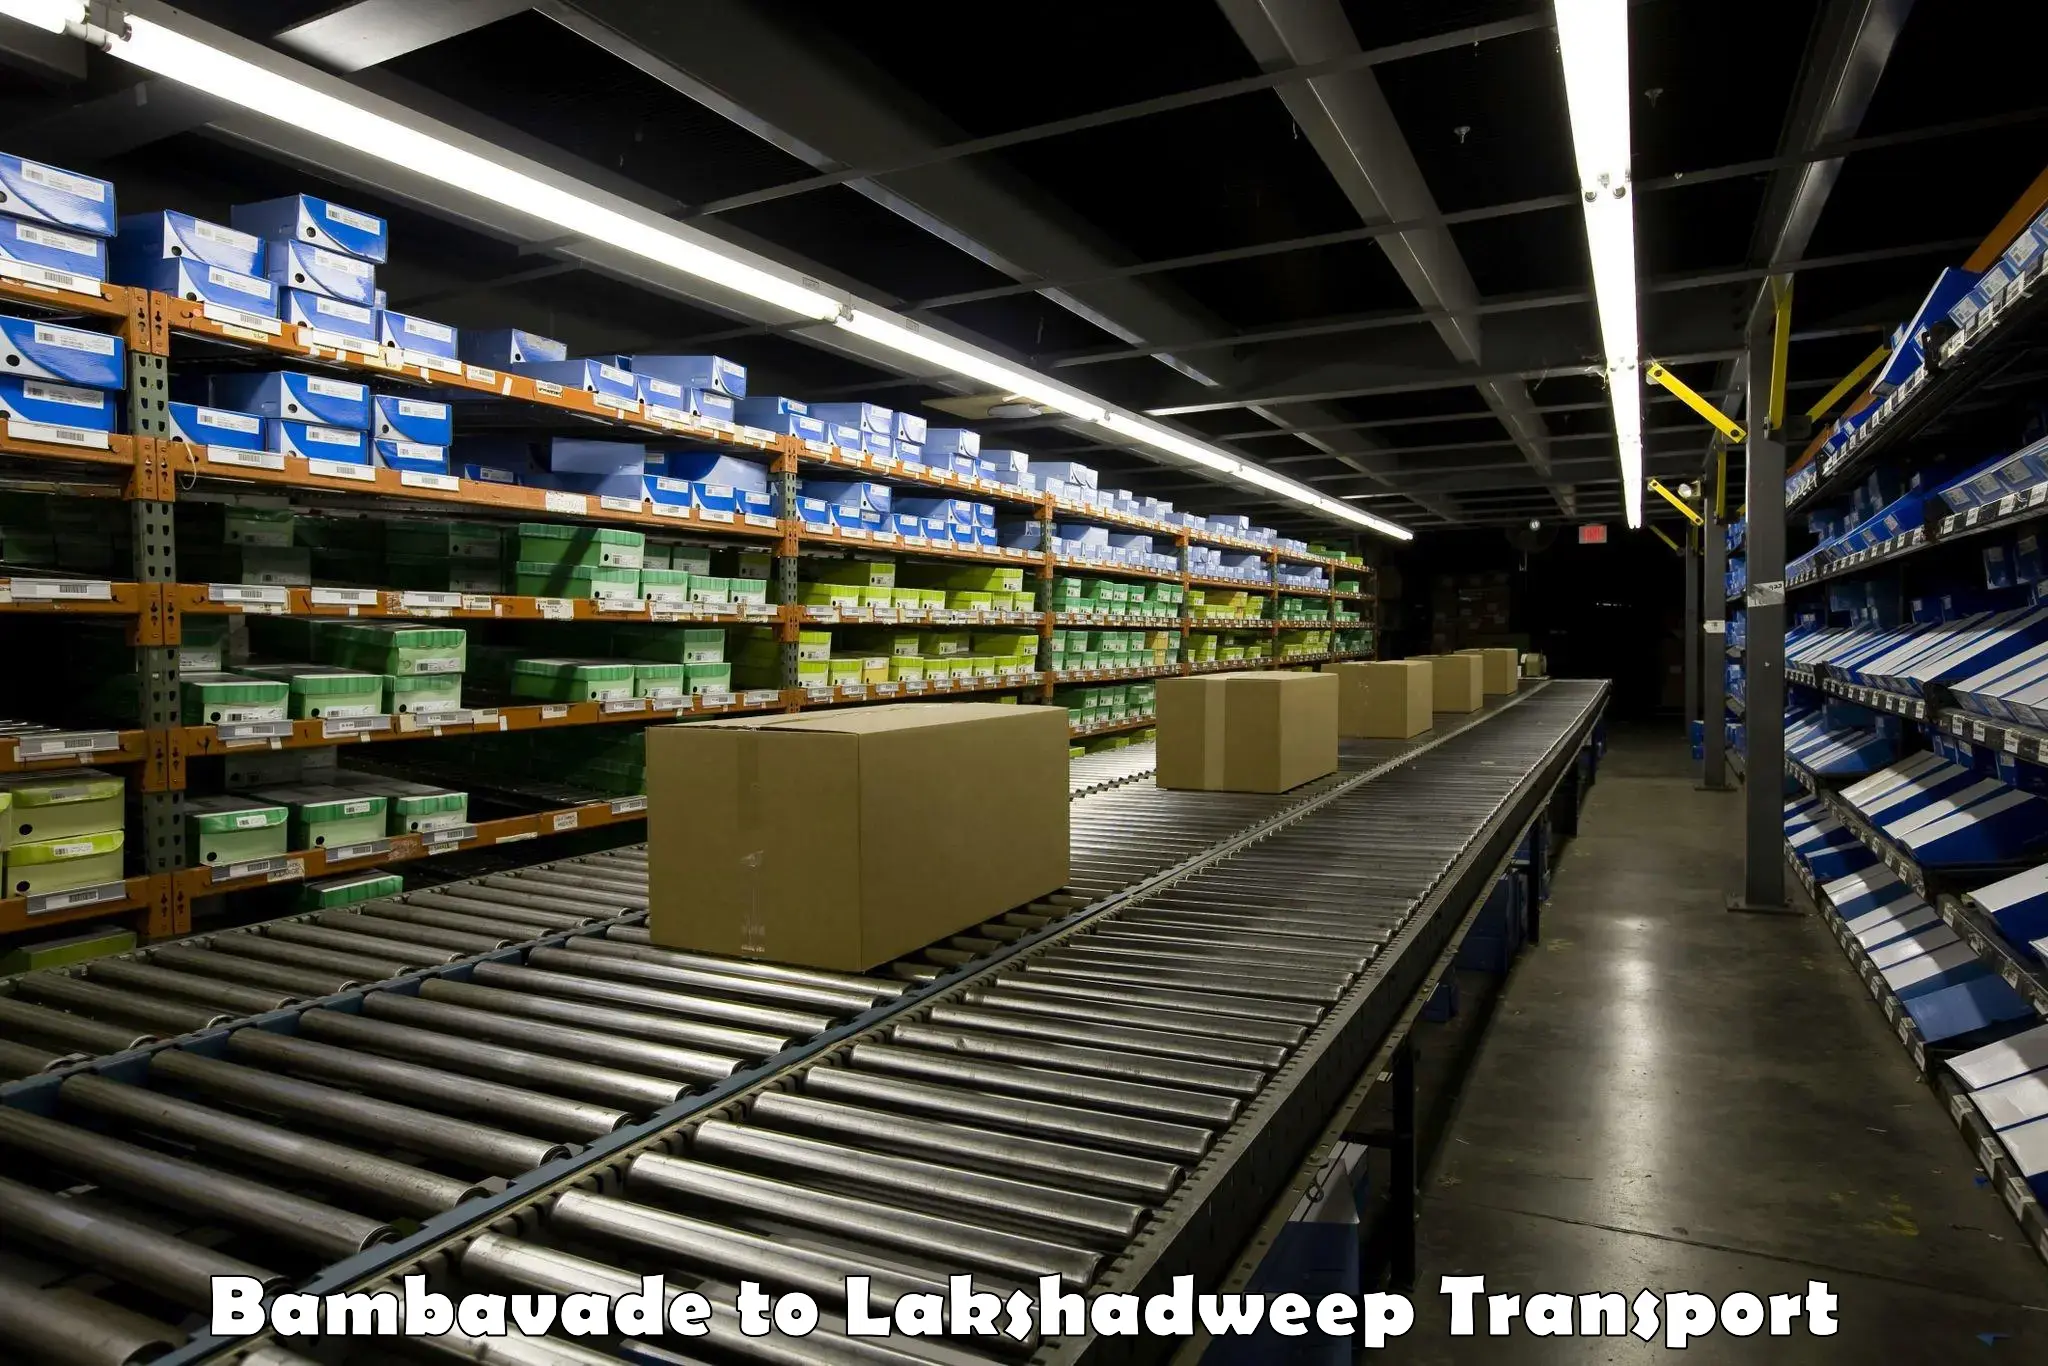 Truck transport companies in India Bambavade to Lakshadweep